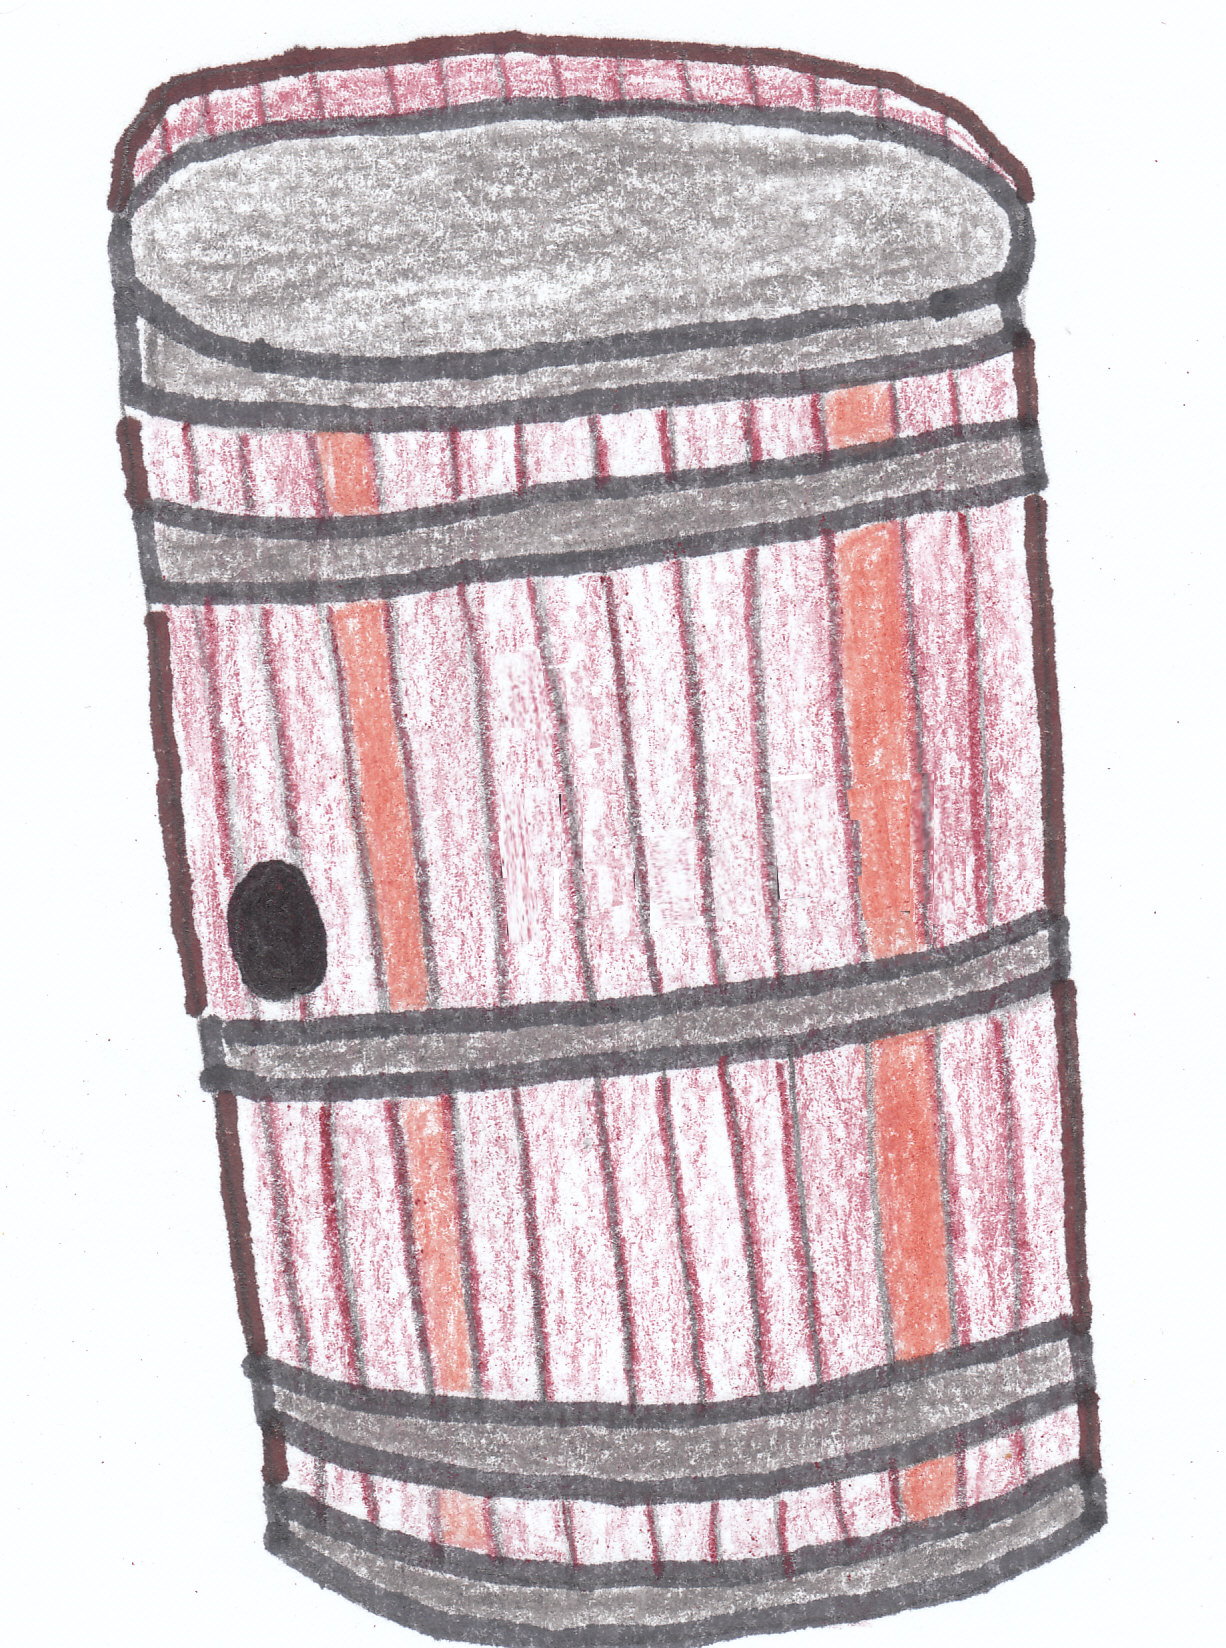 In the barrel